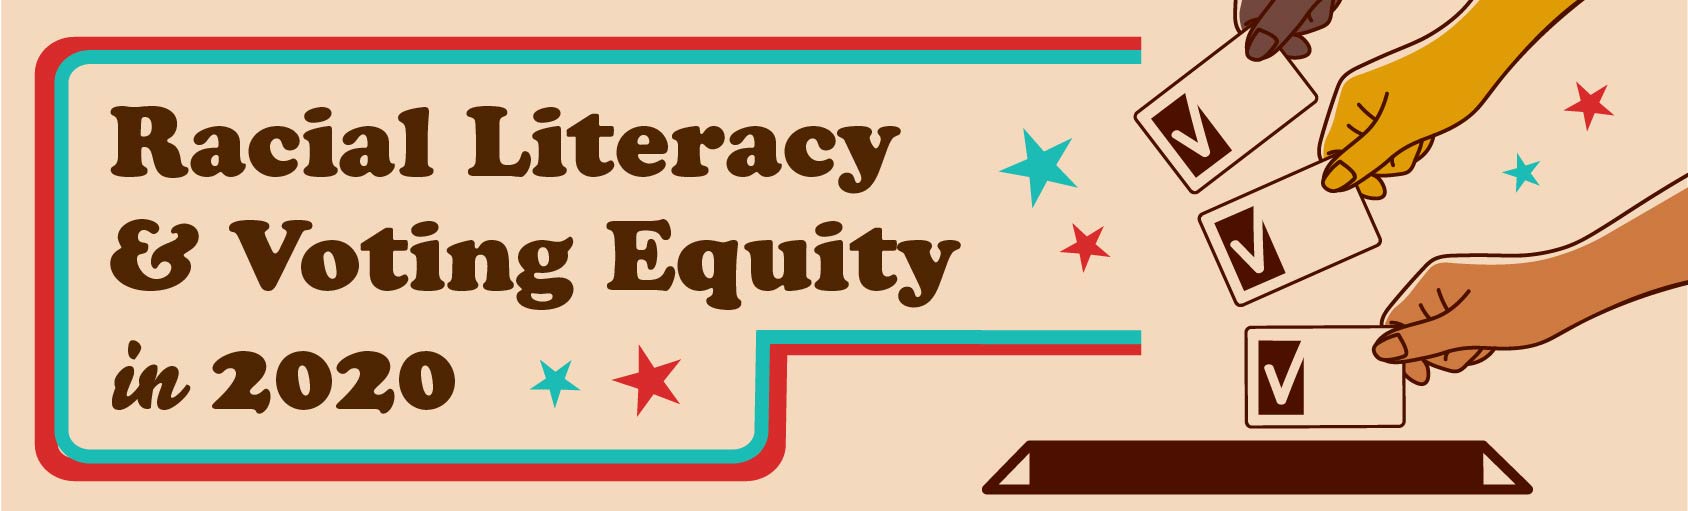 Racial Literacy and Voting Equity